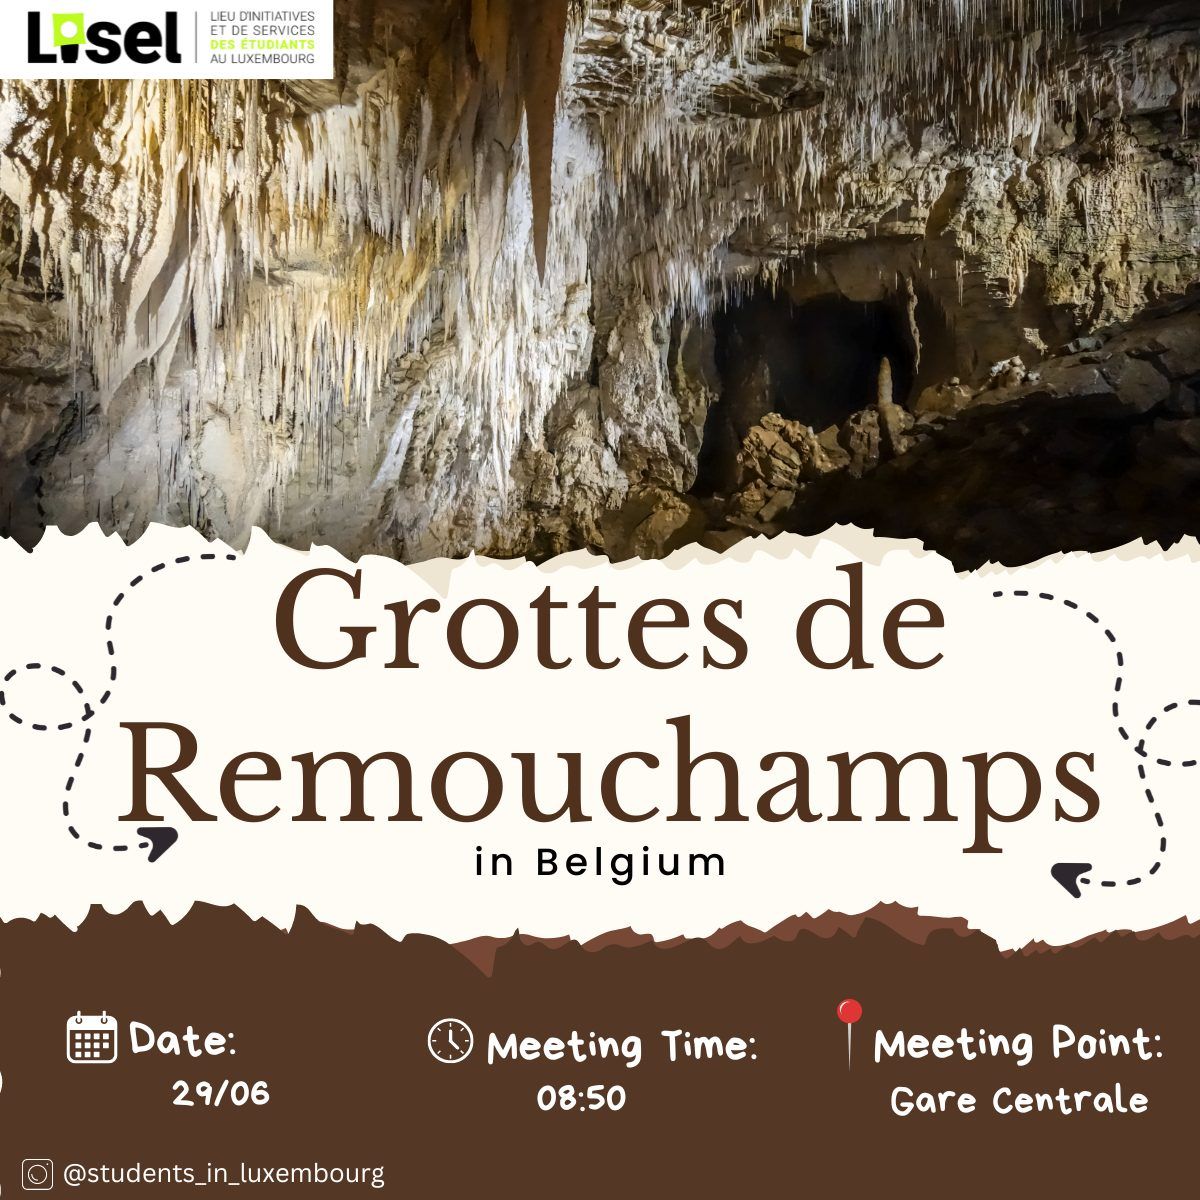 Travel to the caves, Belgium